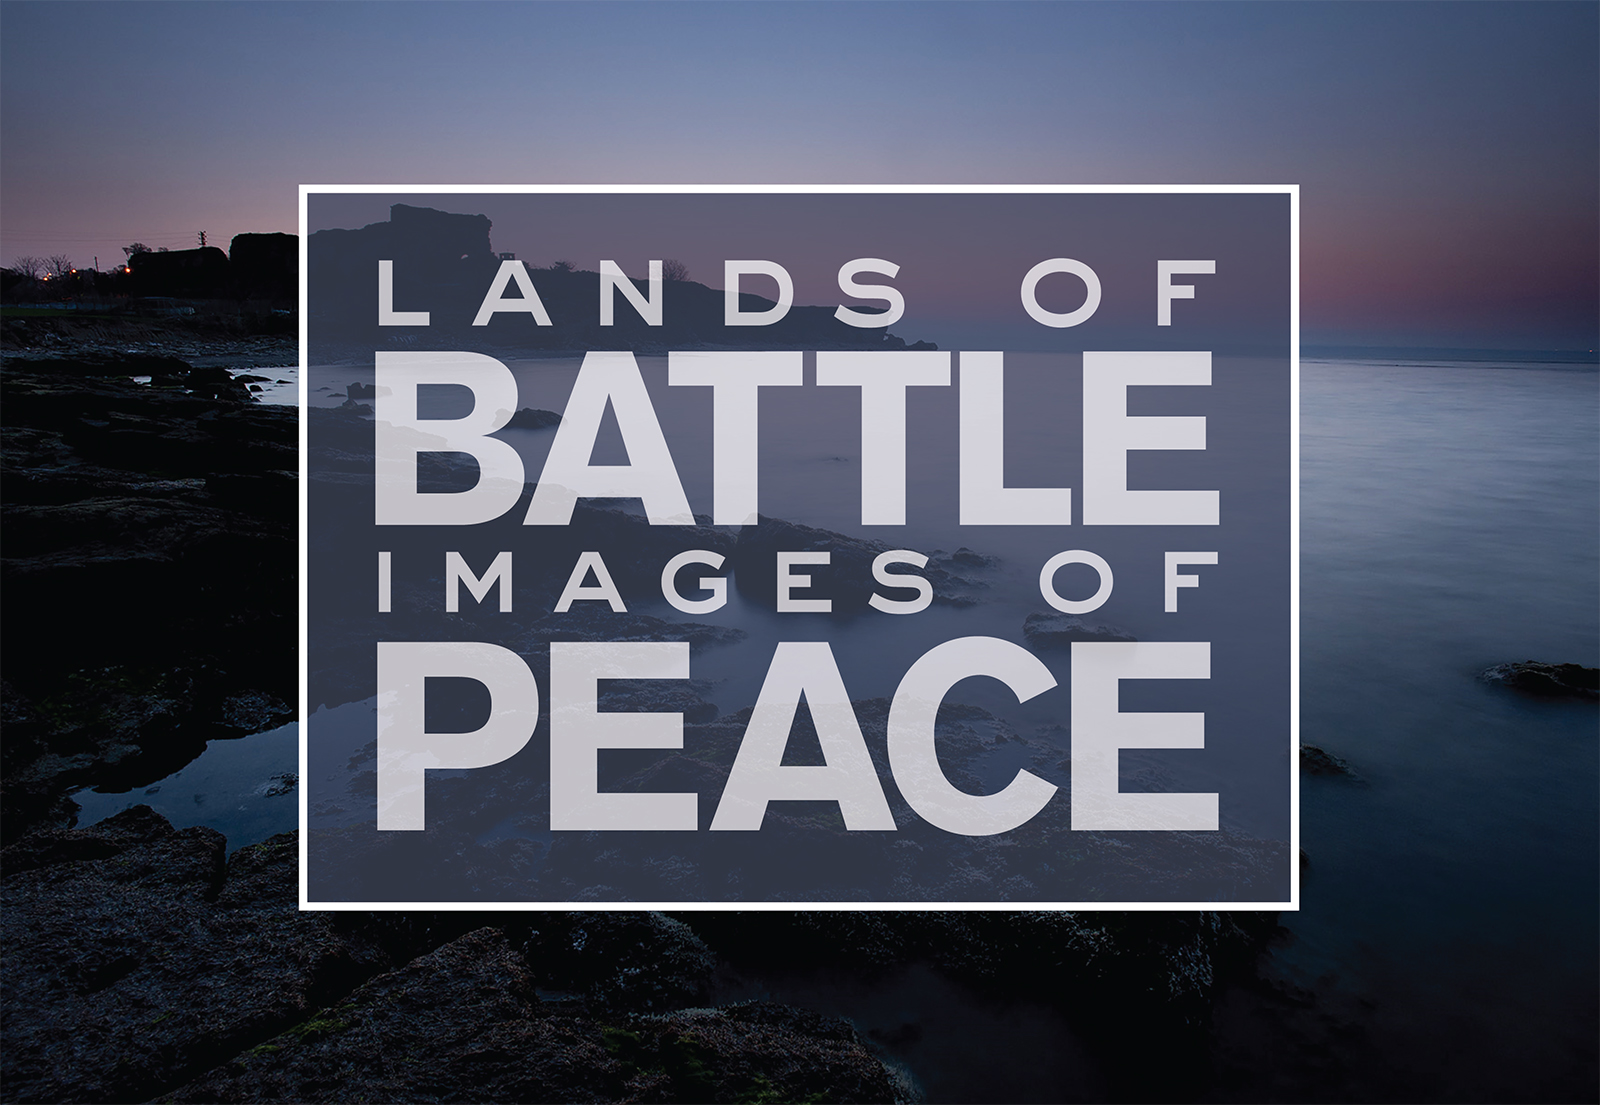 Background image: Sunrise scene of a bay in a sea coastline, lit in soft blues, oranges and pinks. Text: 'Lands of Battle / Images of Peace'